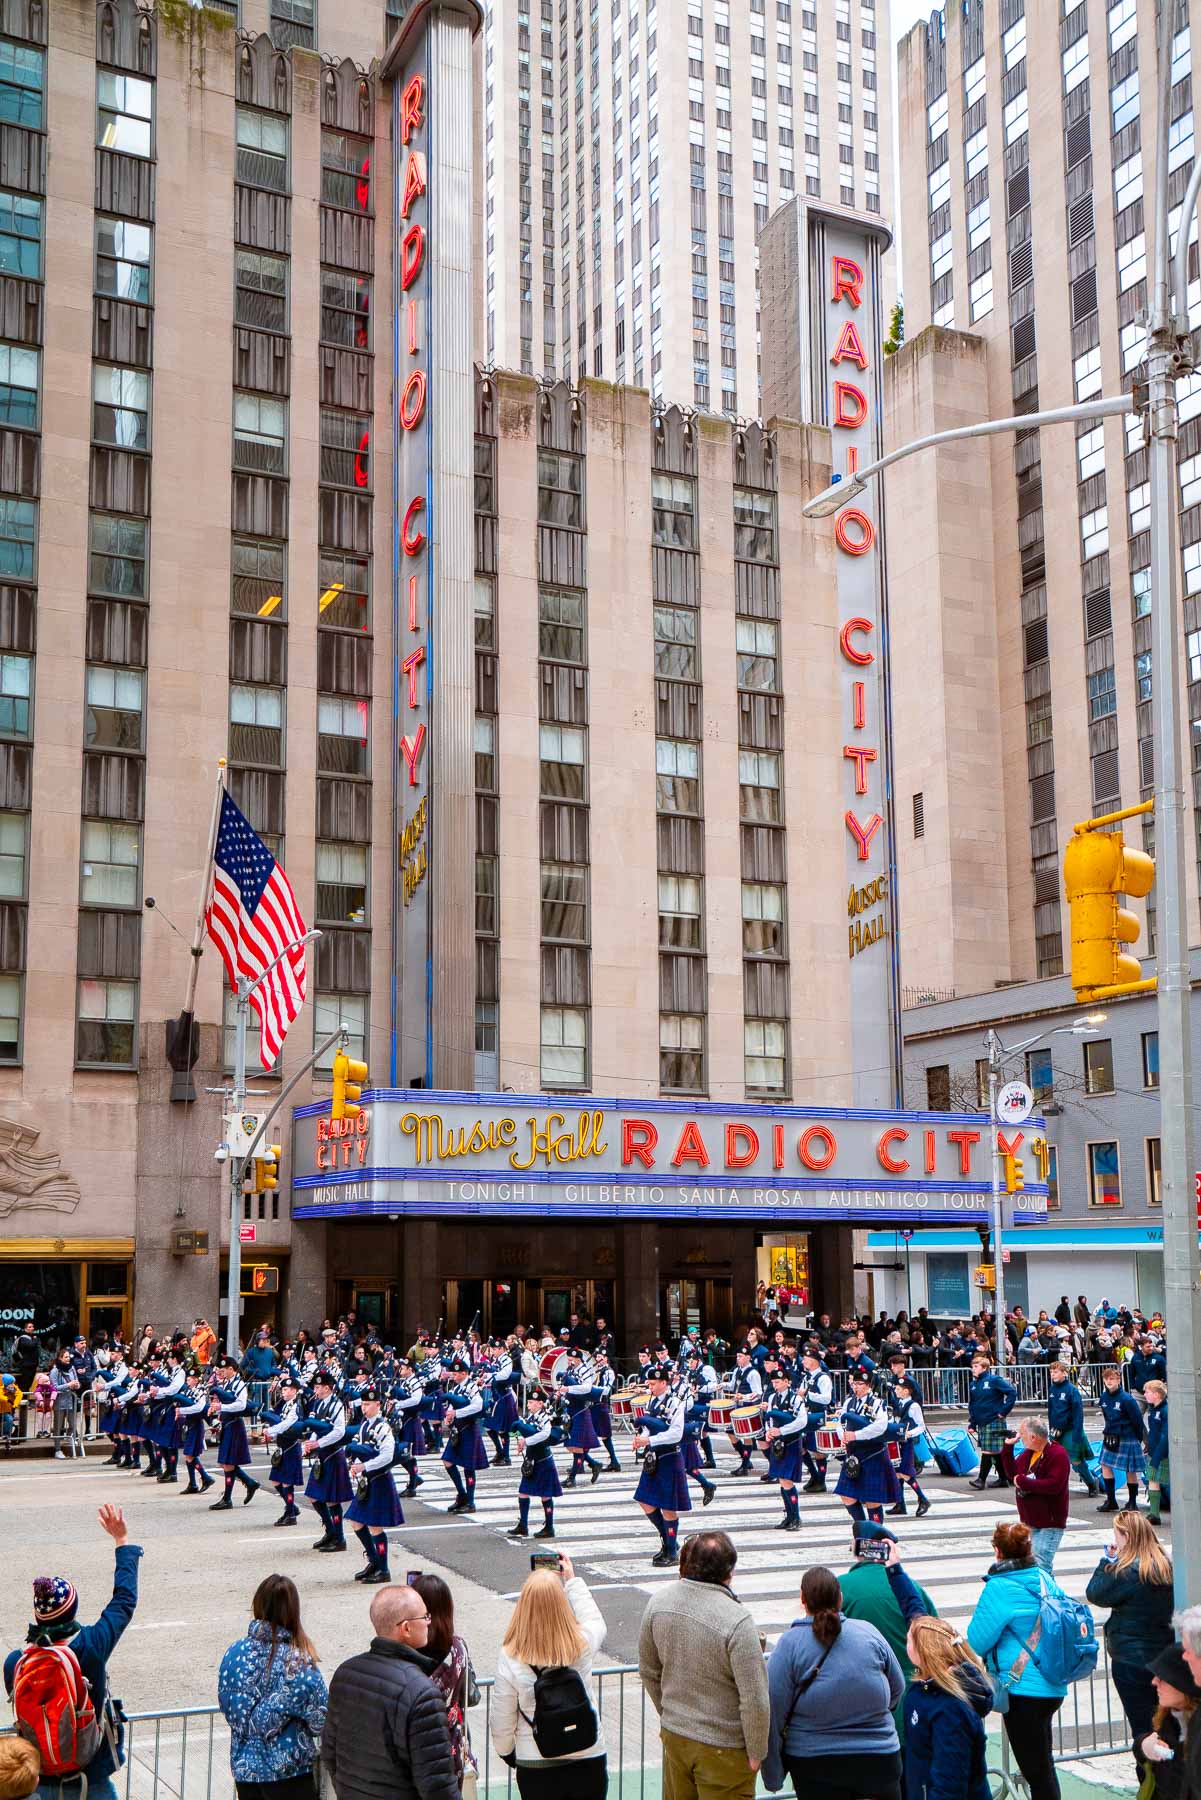 A group of bagpipe players in kilts march in front of Radio City Music Hall as a crowd of onlookers cheer them on during the Tartan Day Parade